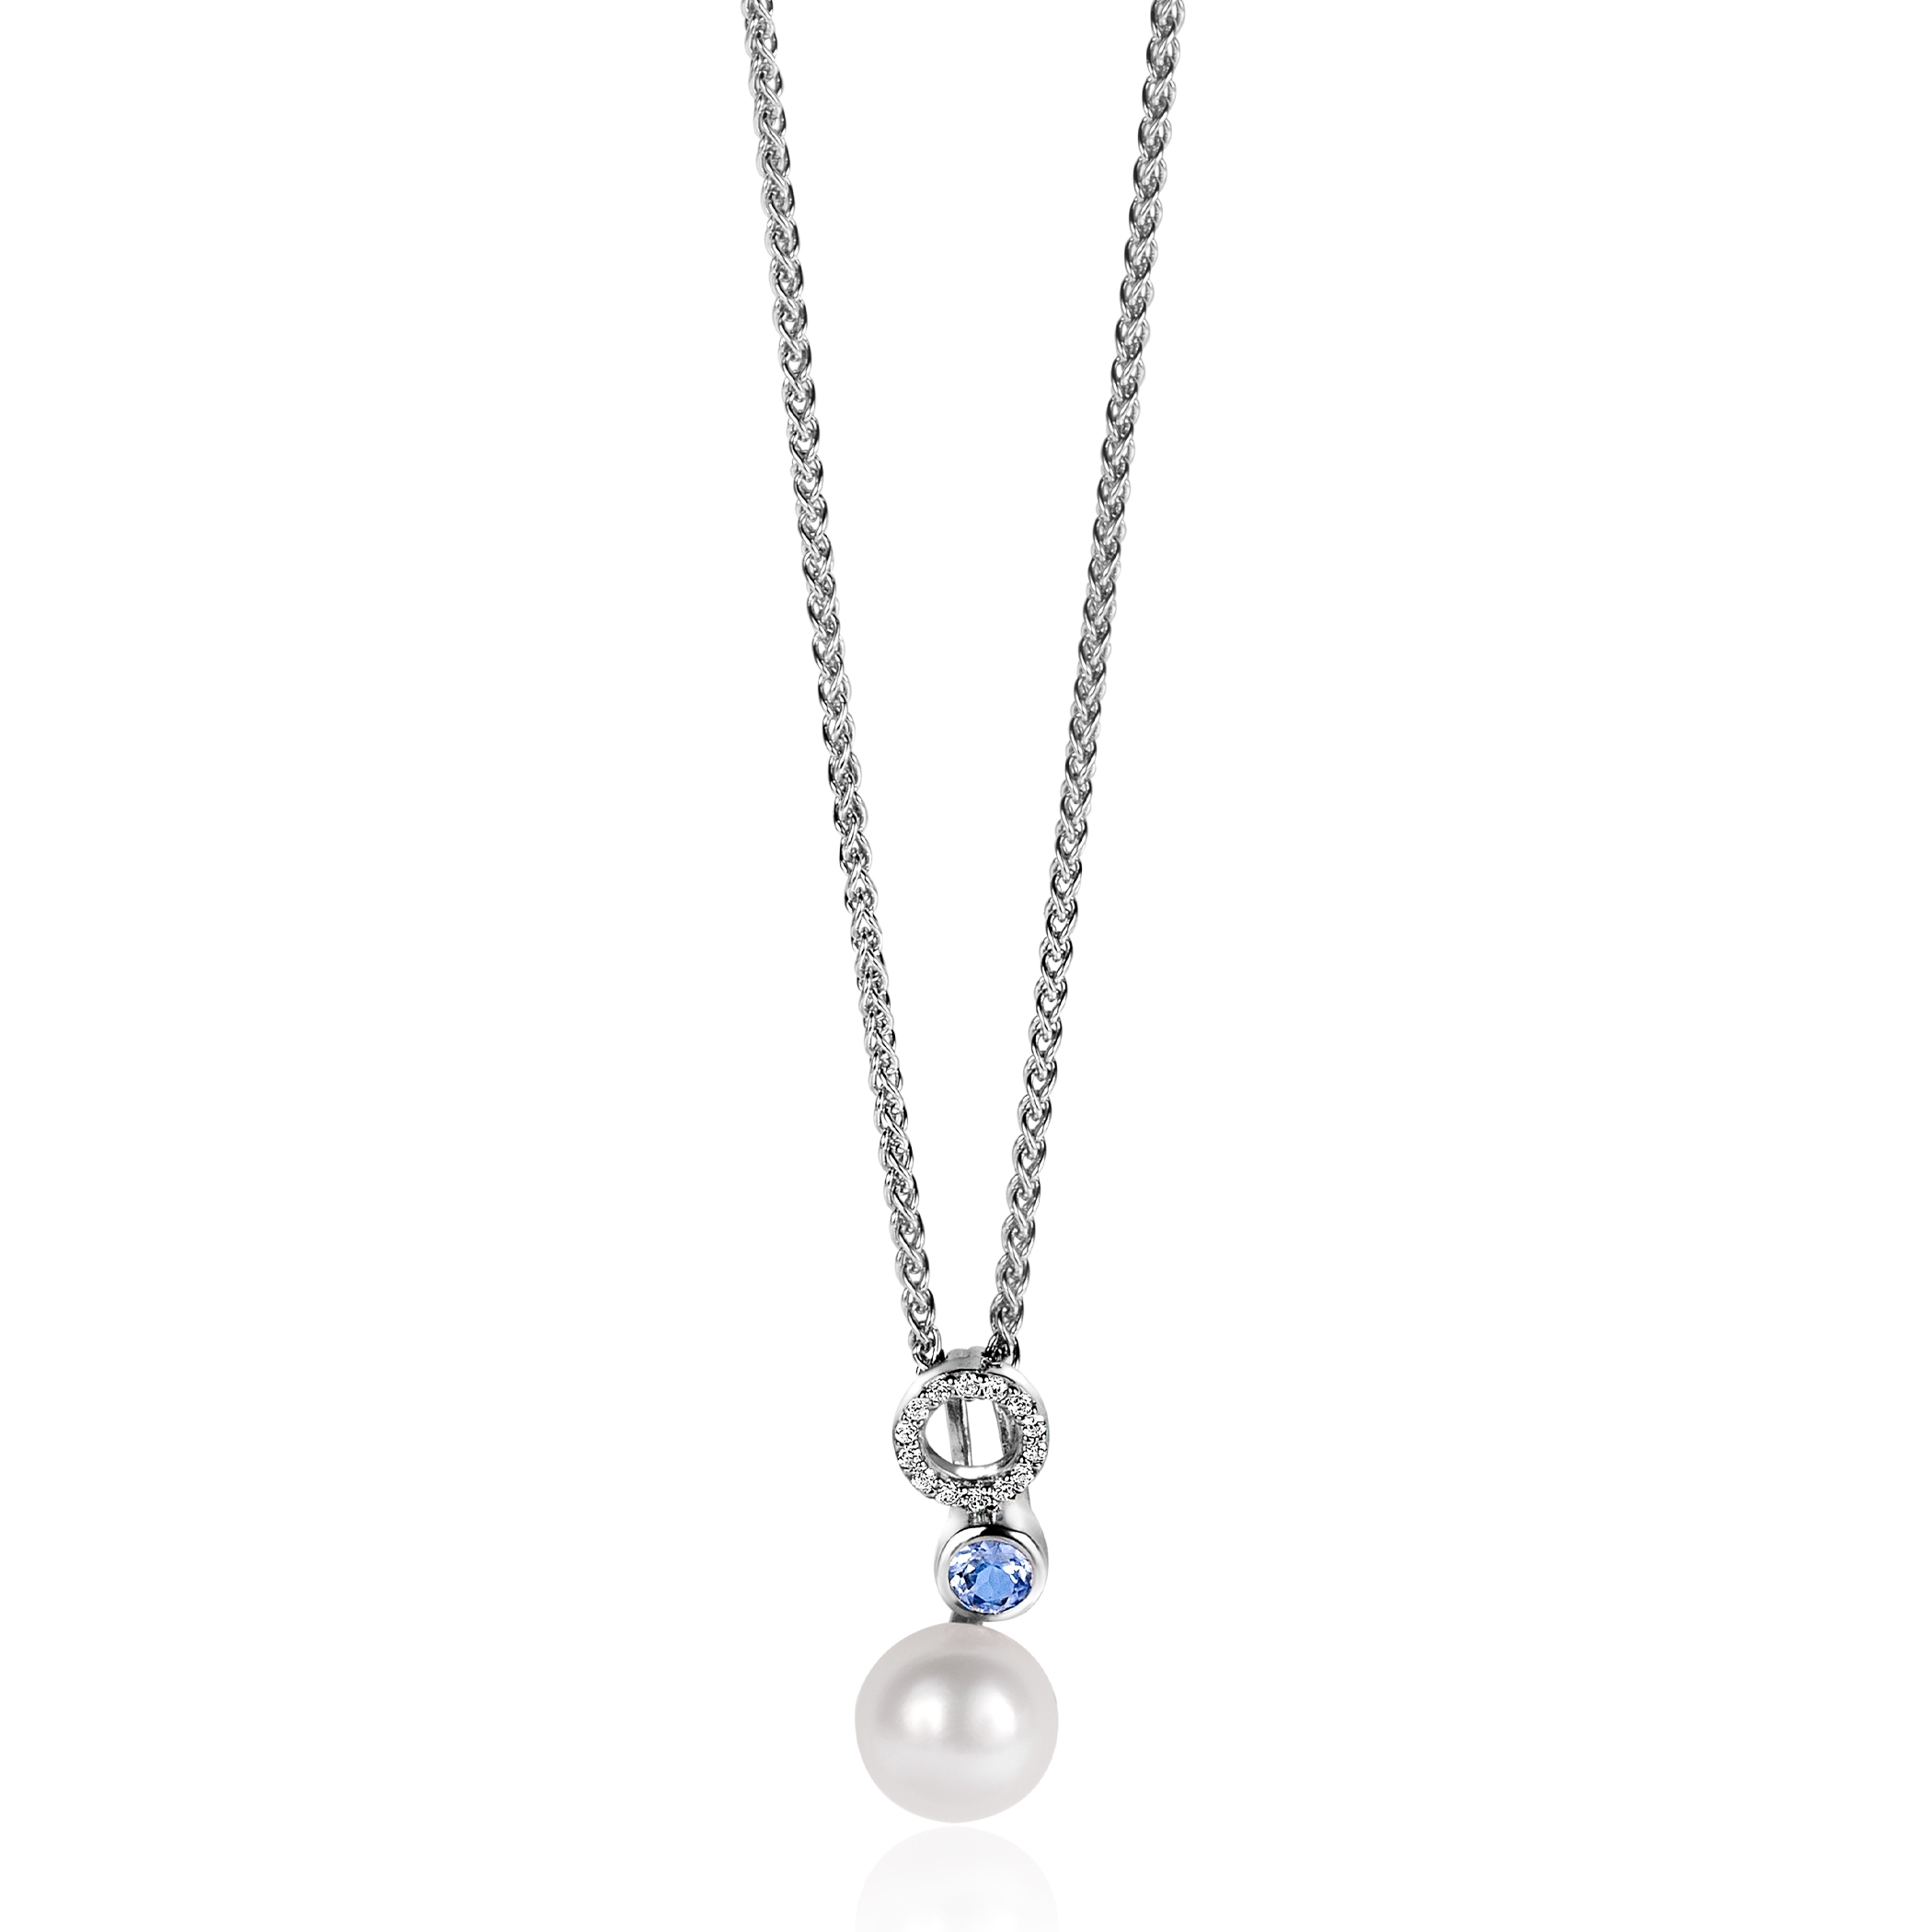 20mm ZINZI Sterling Silver Pendant White Pearl, Round Light Blue Color Stone and Open Circle Set with White Zirconias ZIH2442 (excl. necklace)